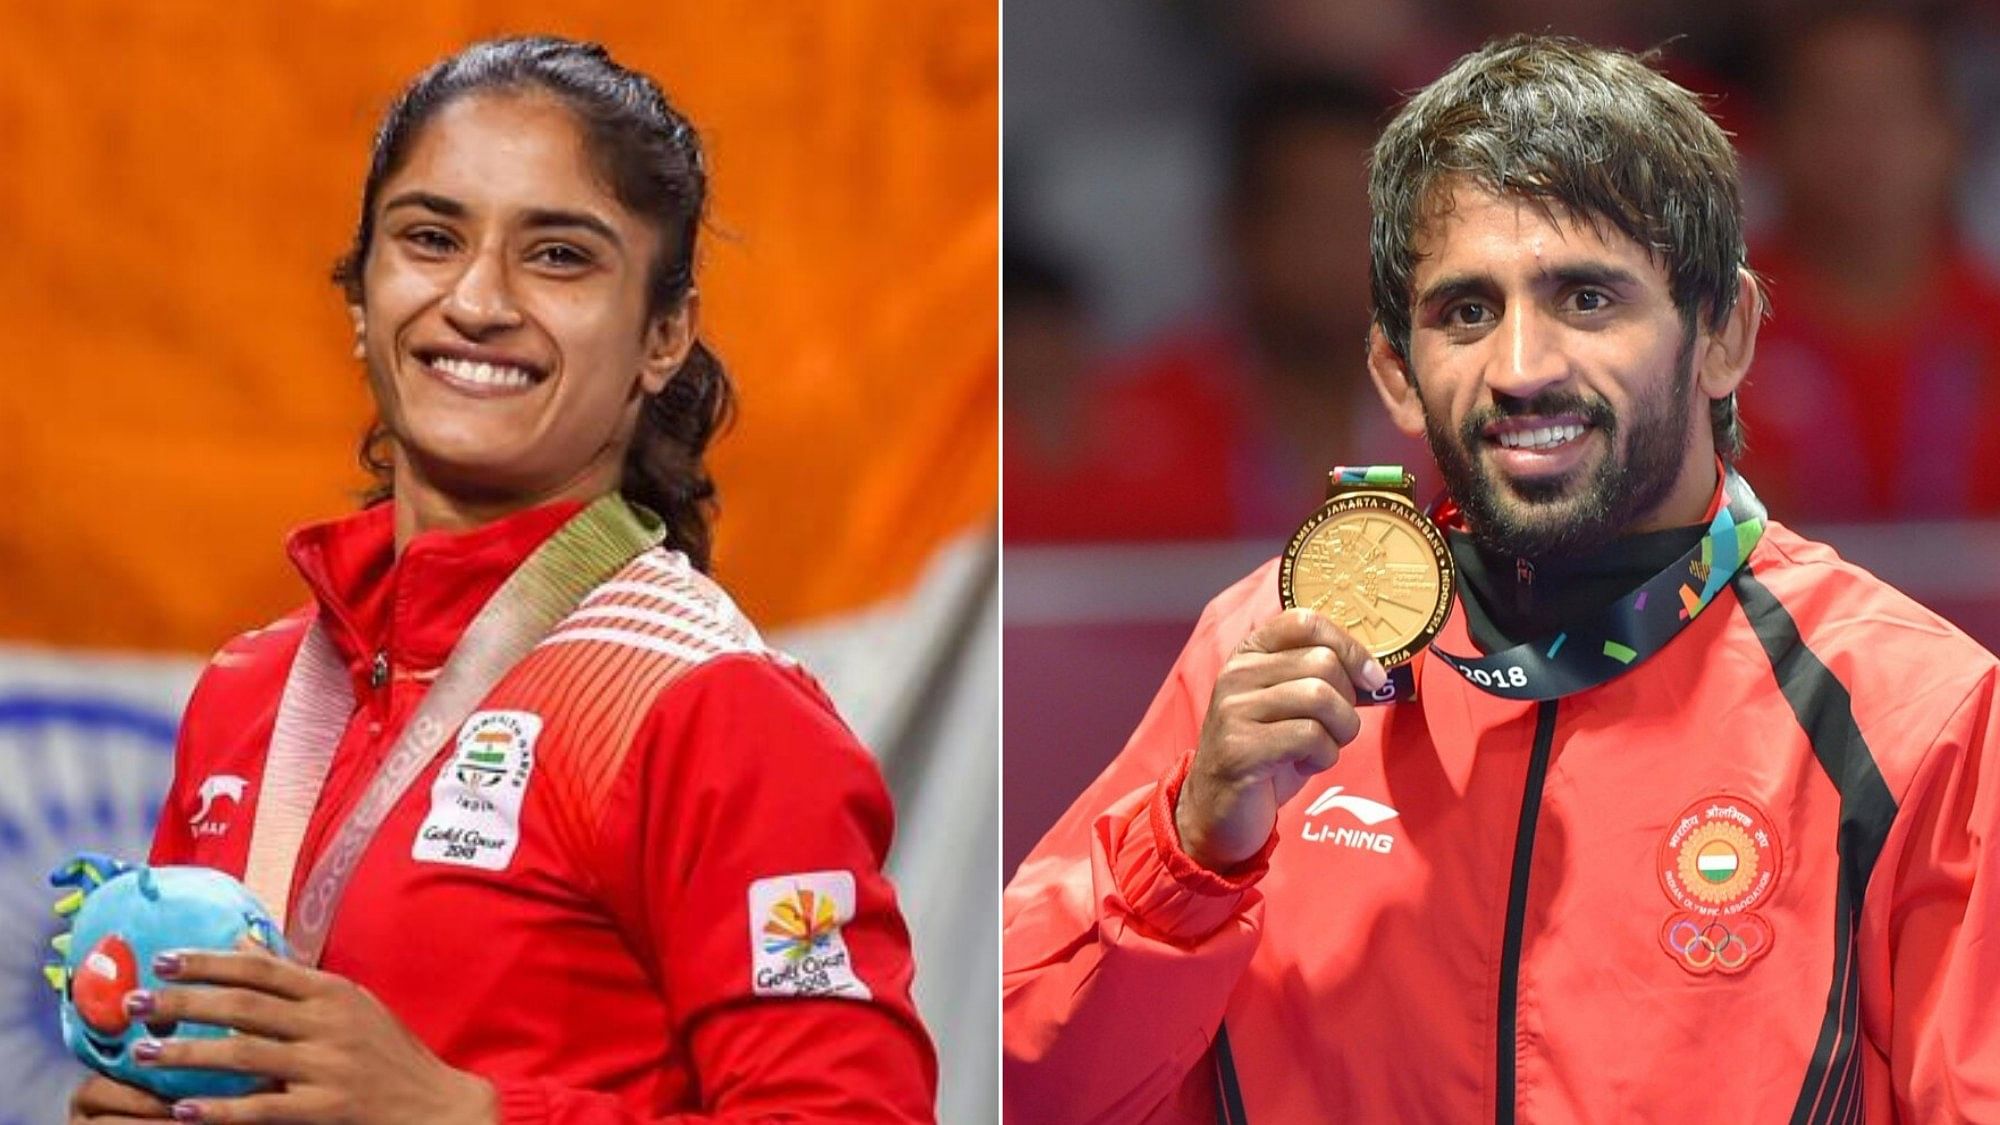 Both Vinesh Phogat (left) and Bajrang Punia have returned to the top spot in the world rankings in their respective categories.